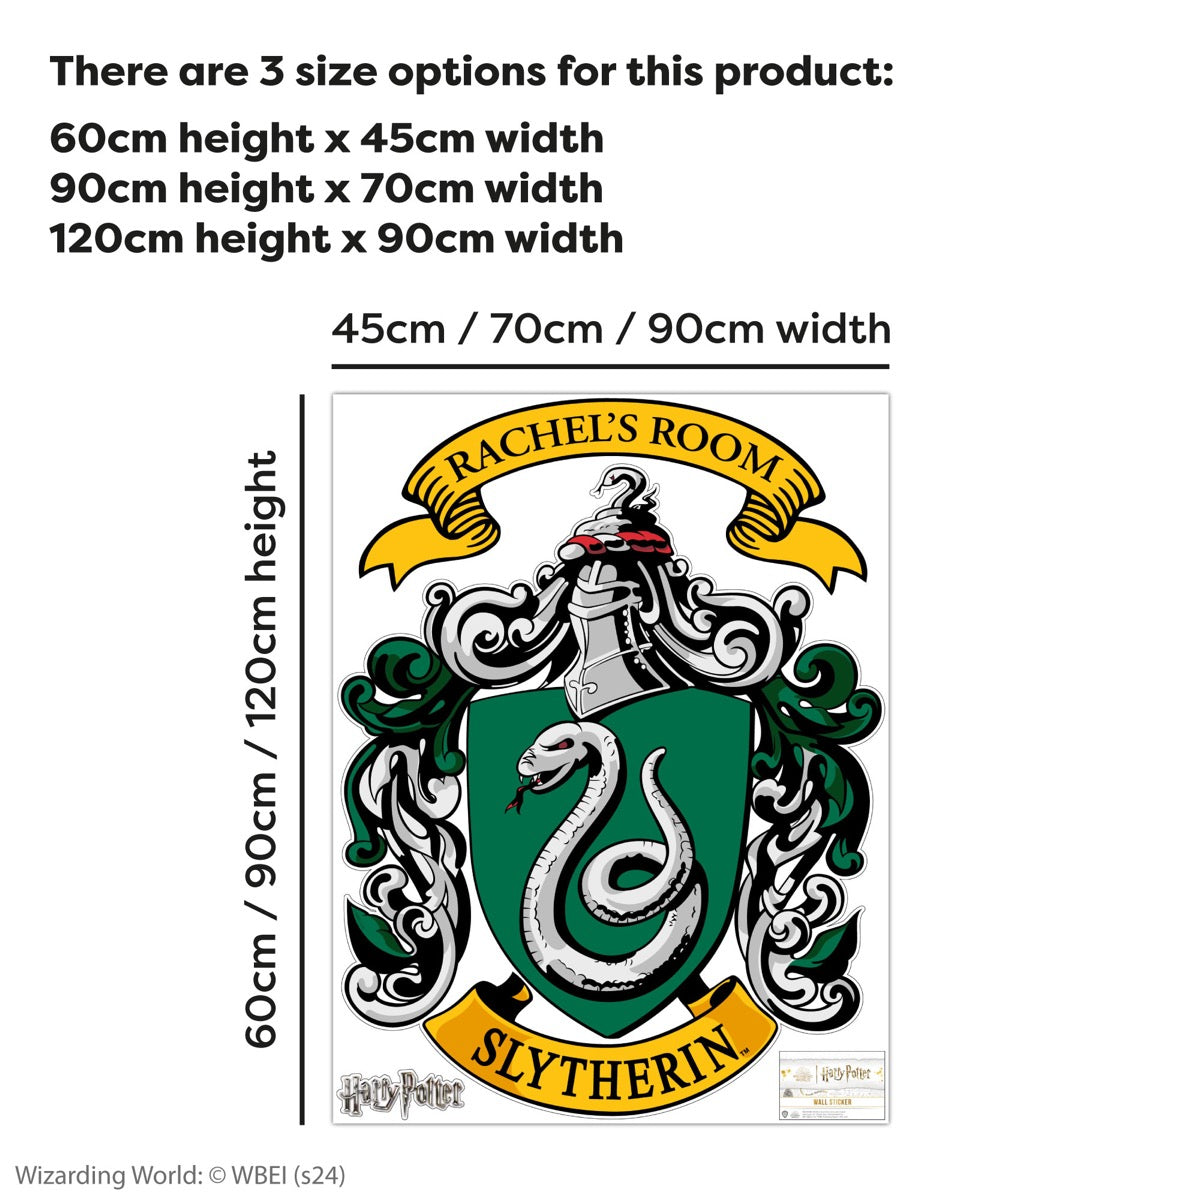 HARRY POTTER Wall Sticker - Slytherin Personalised Crest Wall Decal Wizarding World Art